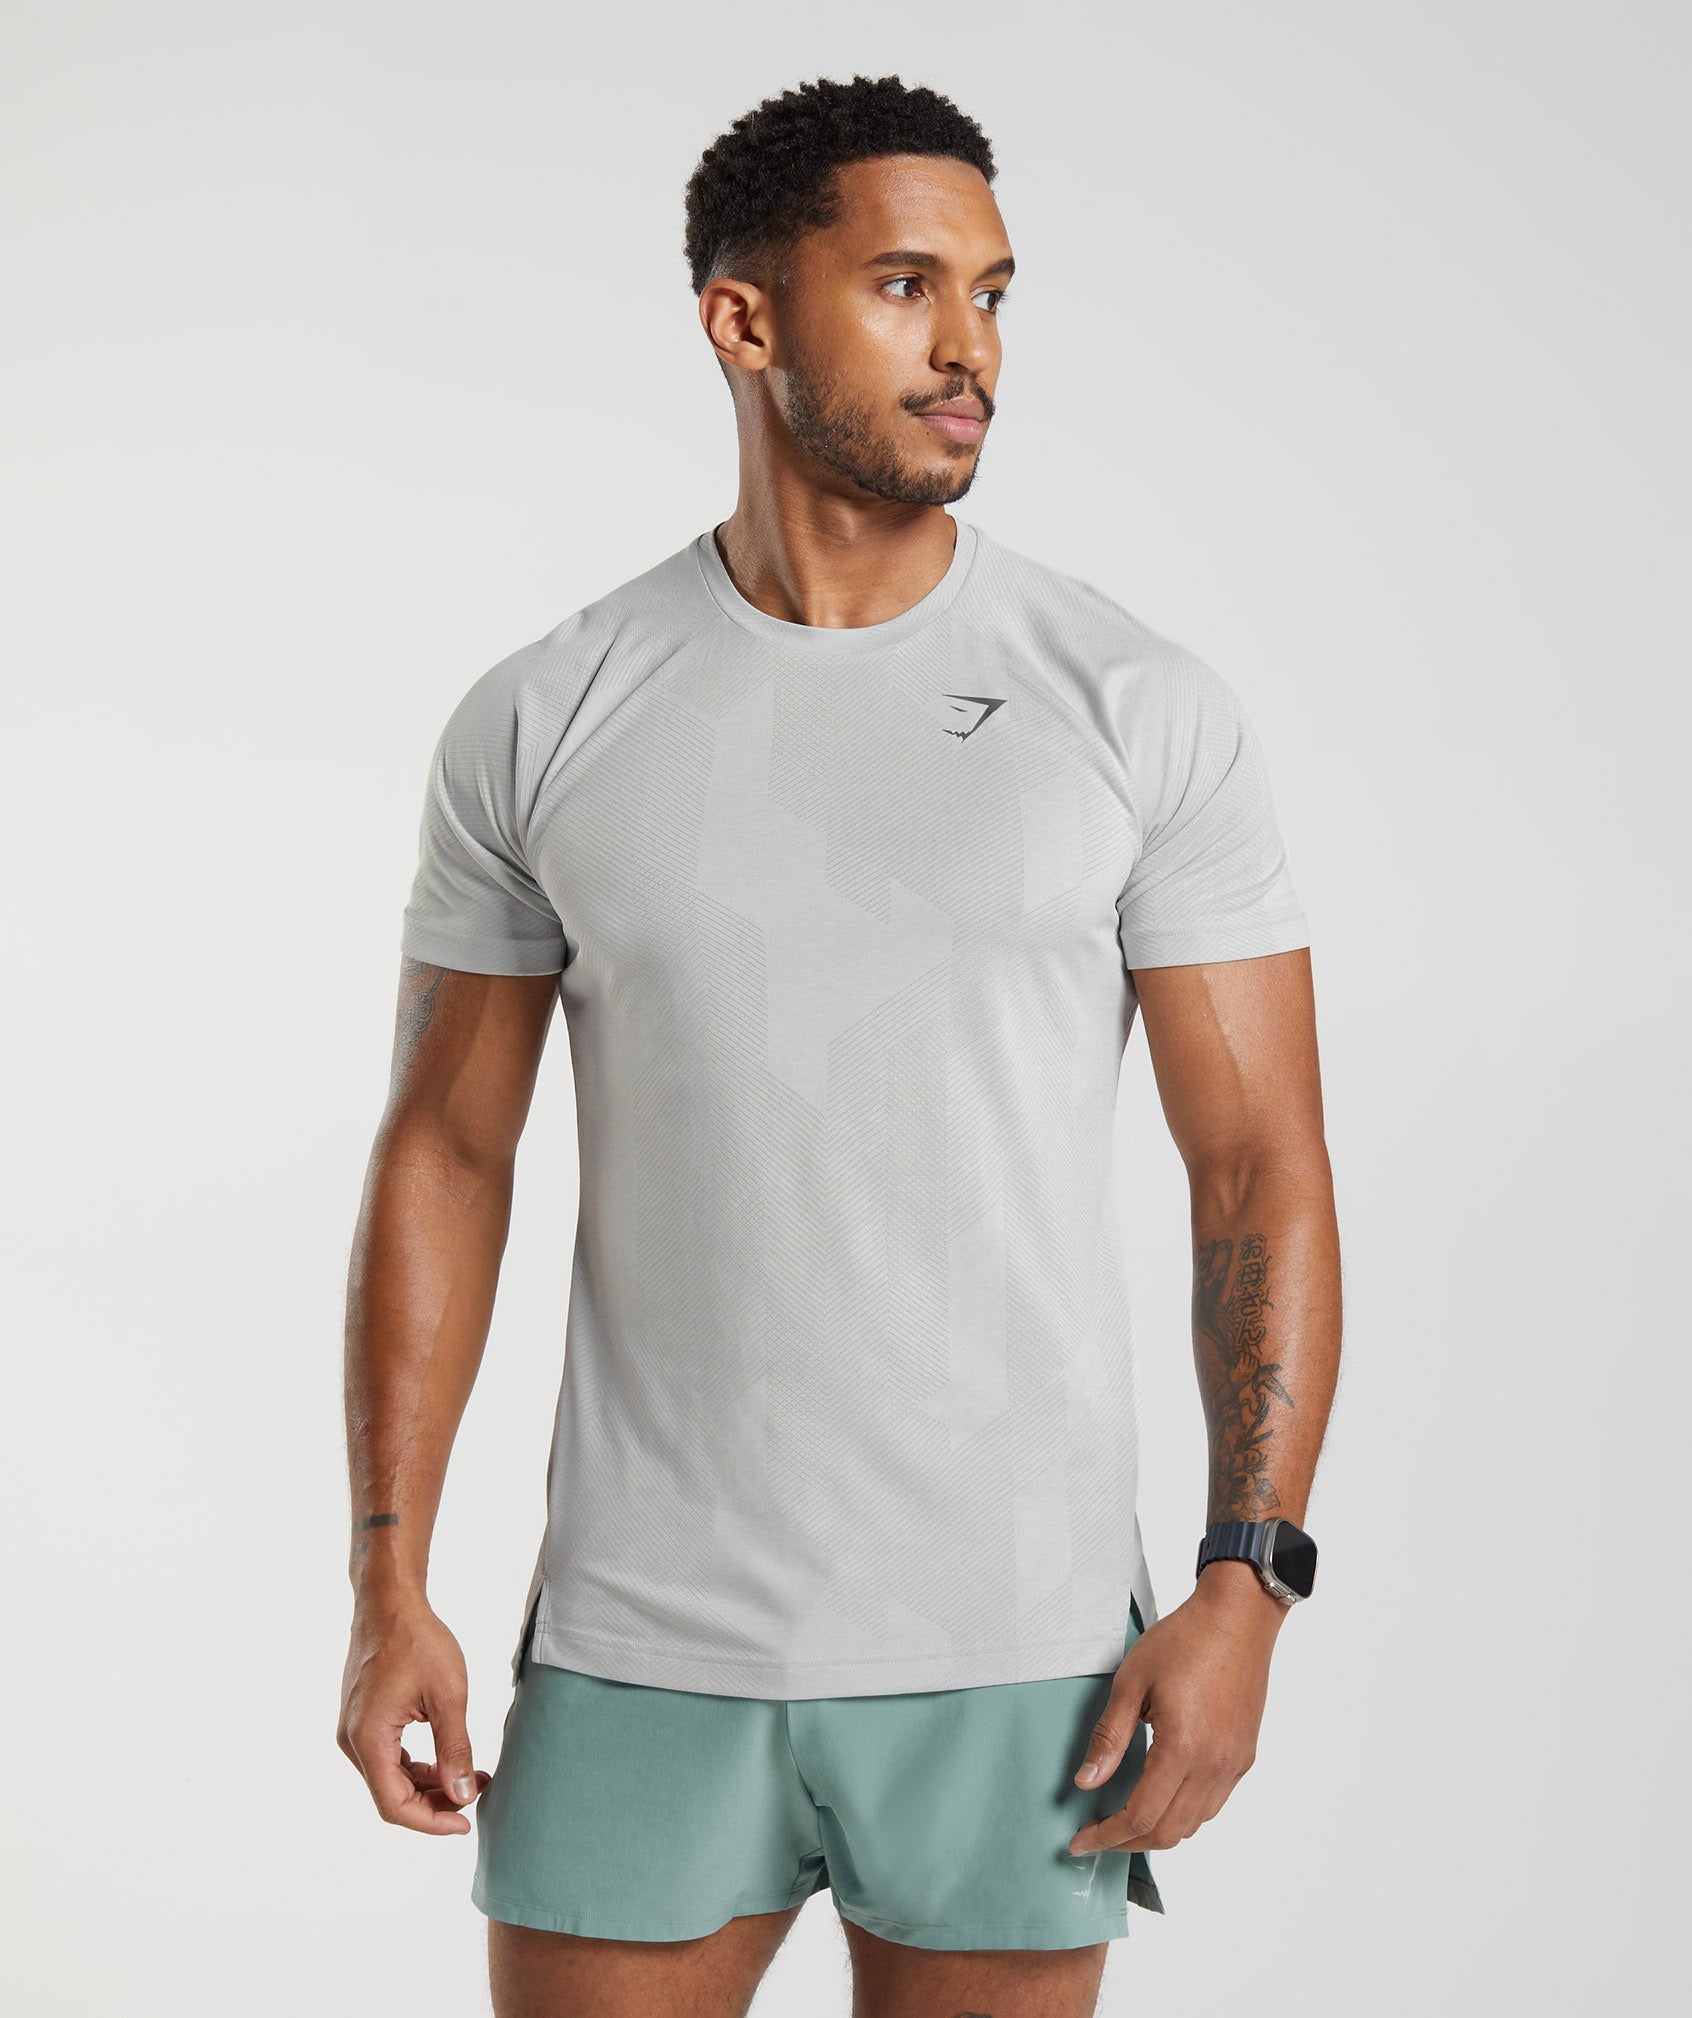 Men's Muscle Fit shirts – Muscle shirts from Gymshark